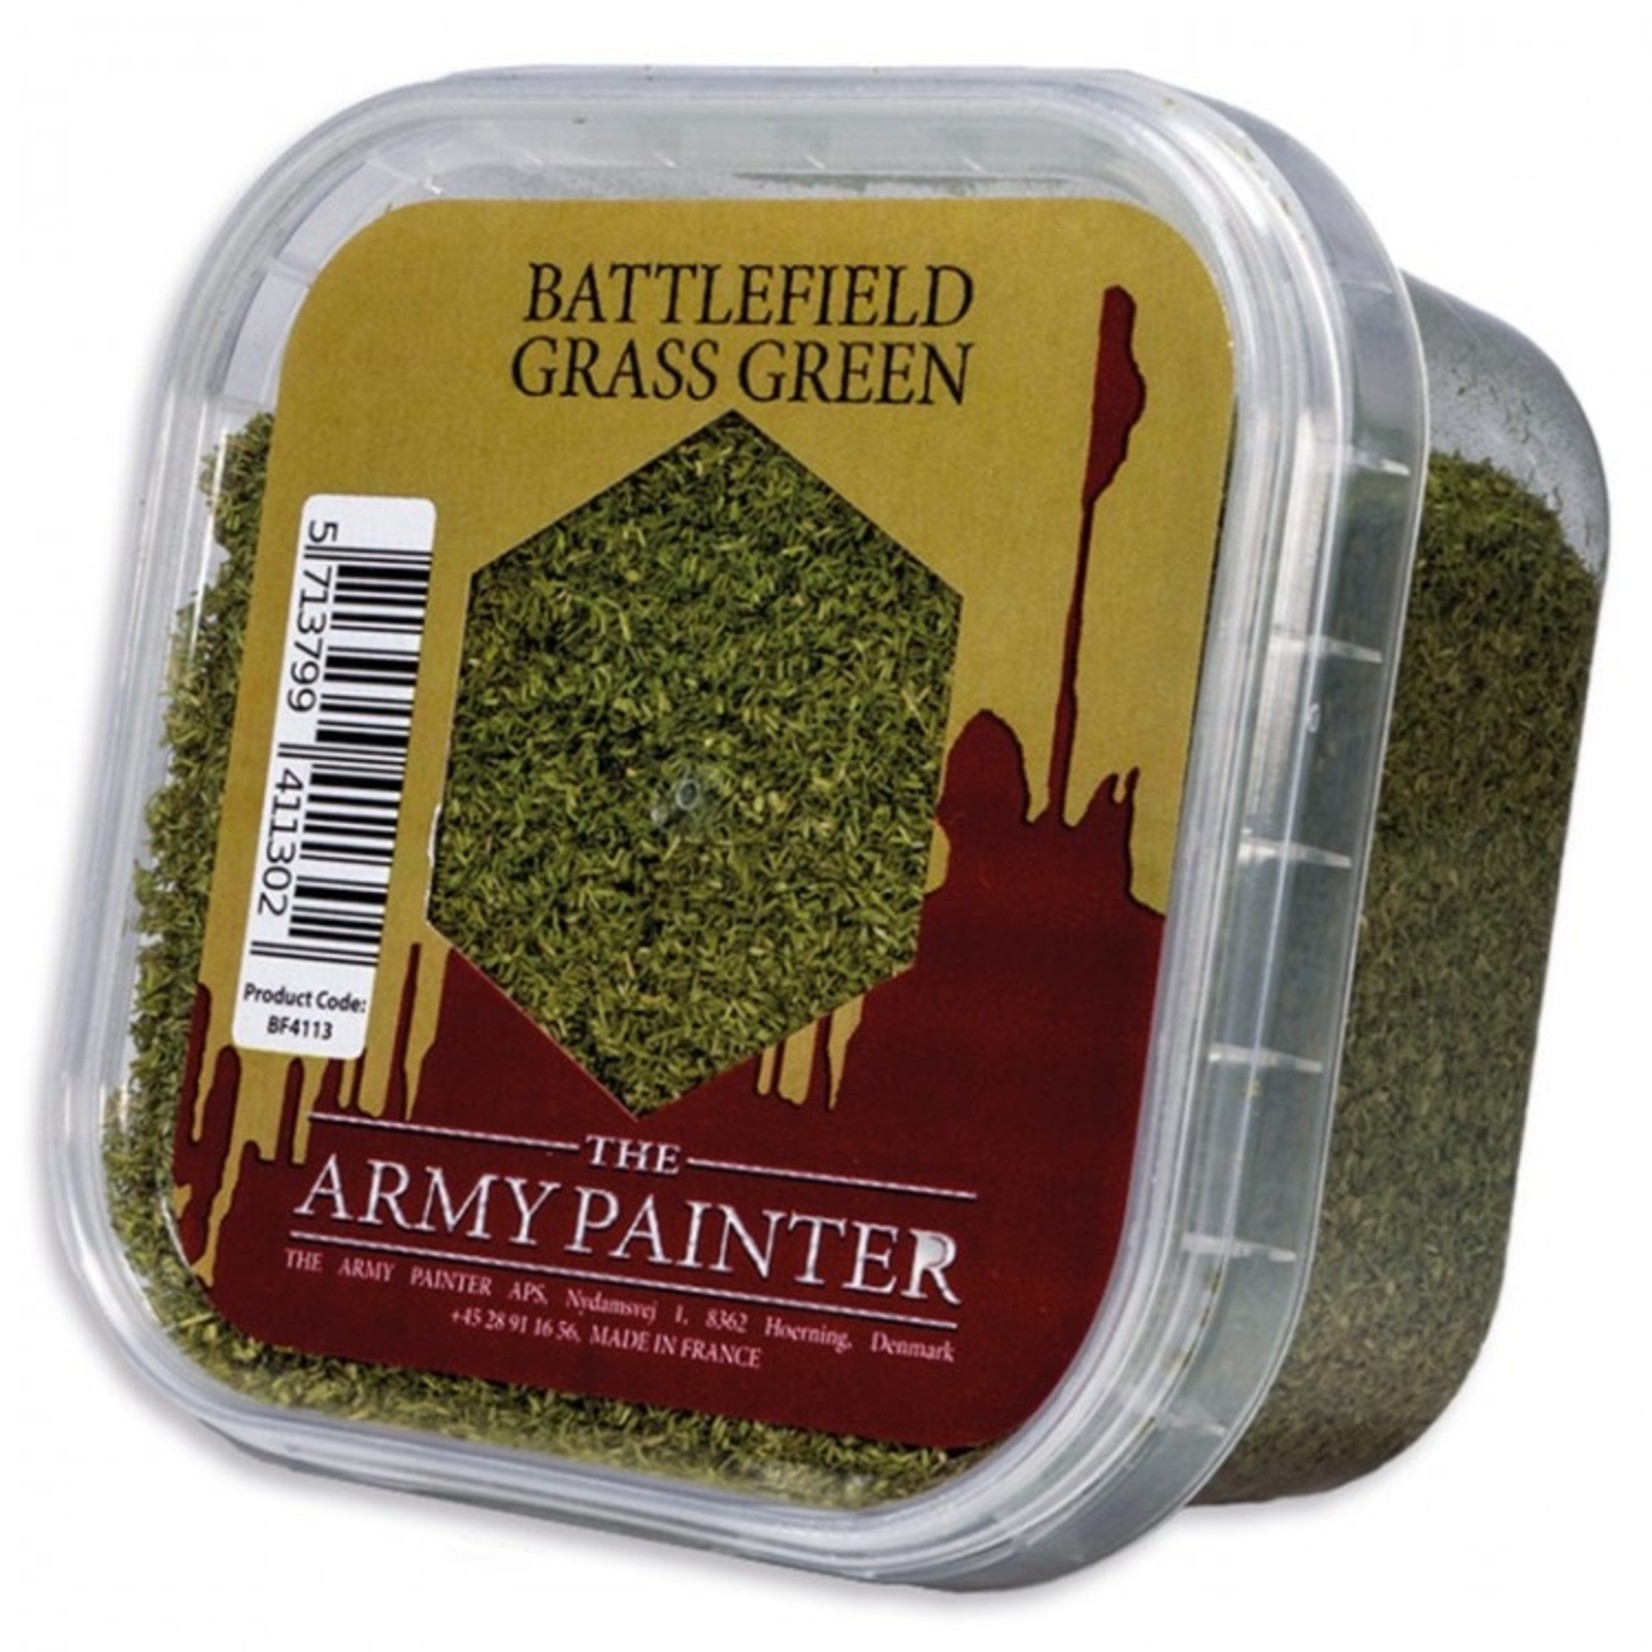 The Army Painter The Army Painter Battlefield Grass Green